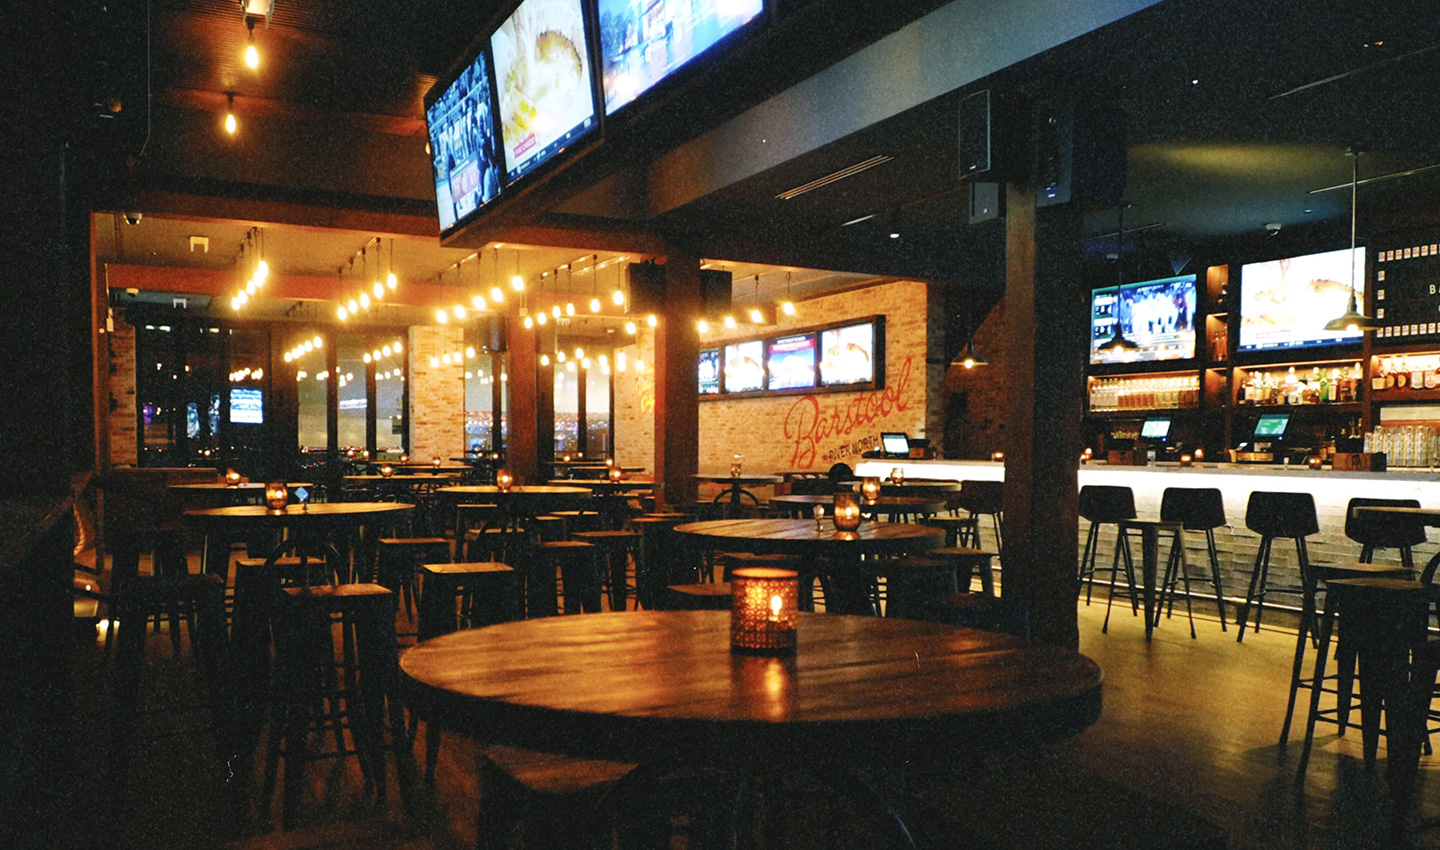 View of inside of bar